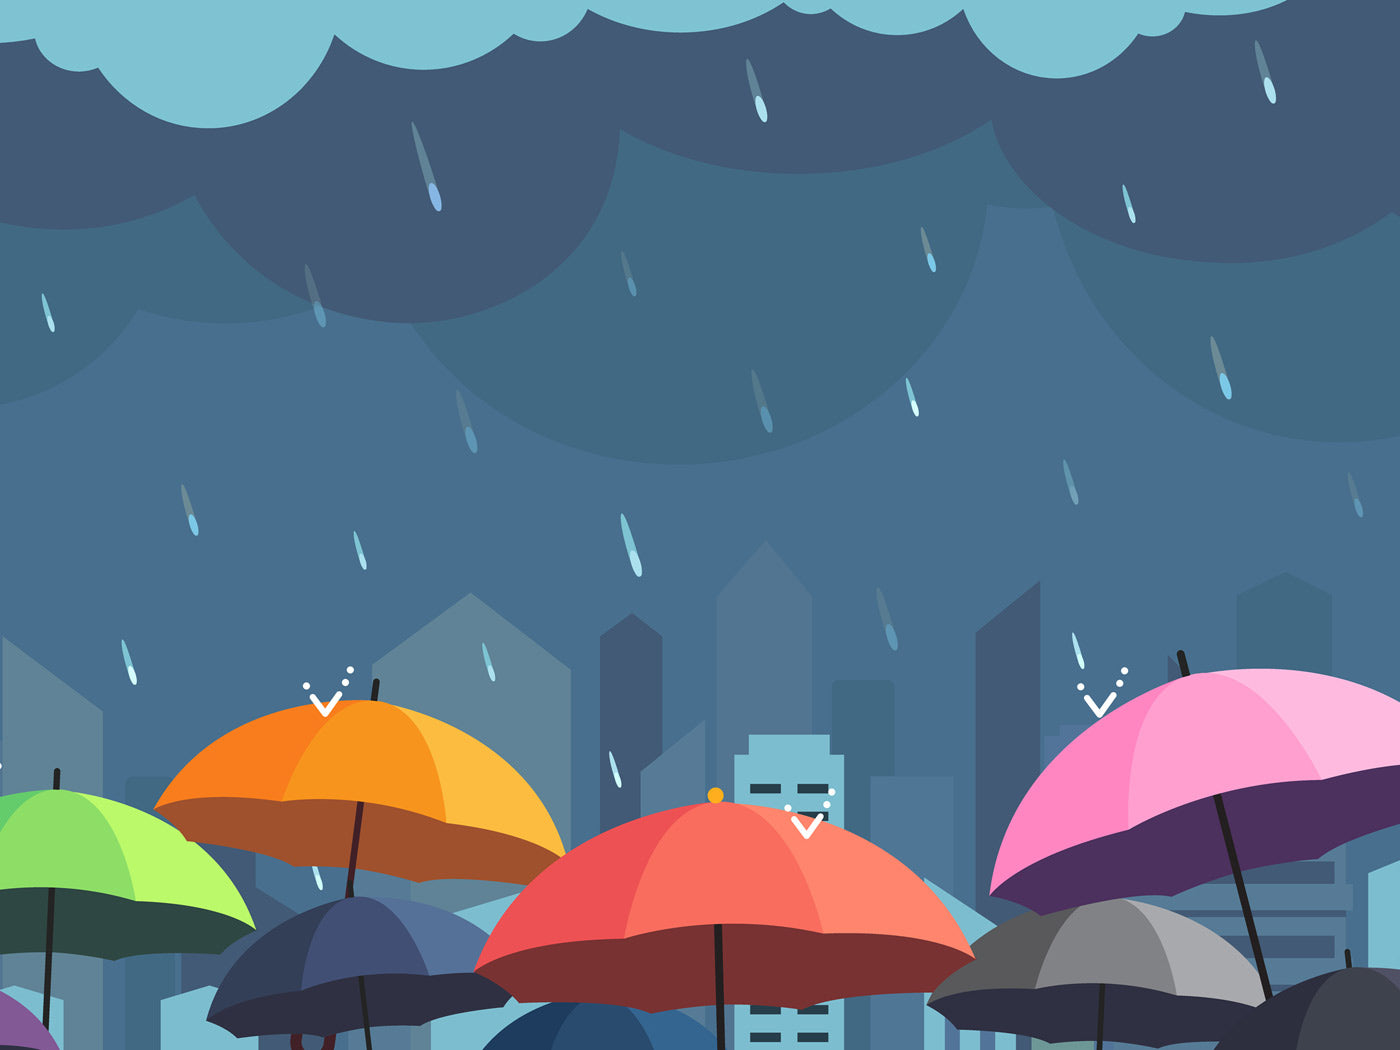 These 11 tips will ensure you stay healthy during this monsoon season